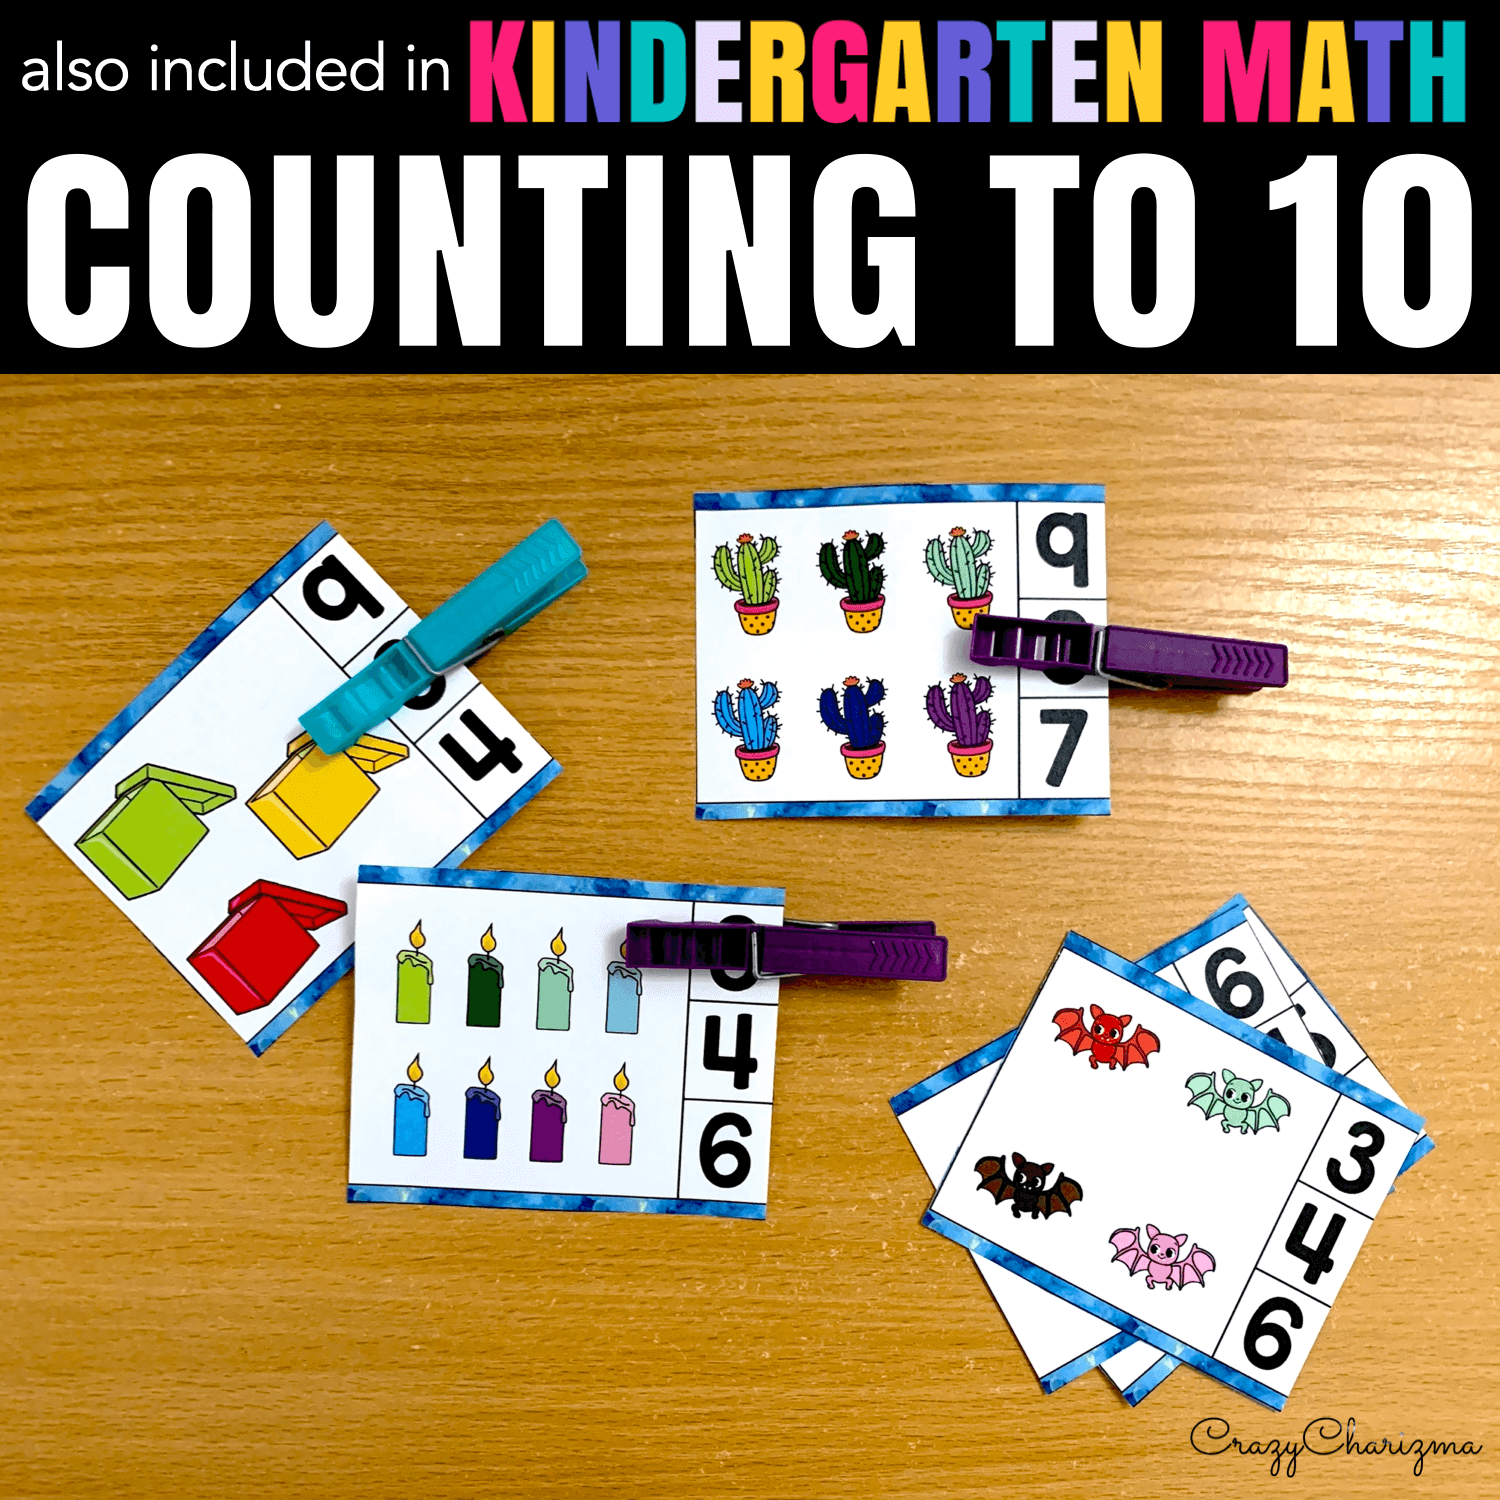 Practice counting objects to 10 with bright clip cards.